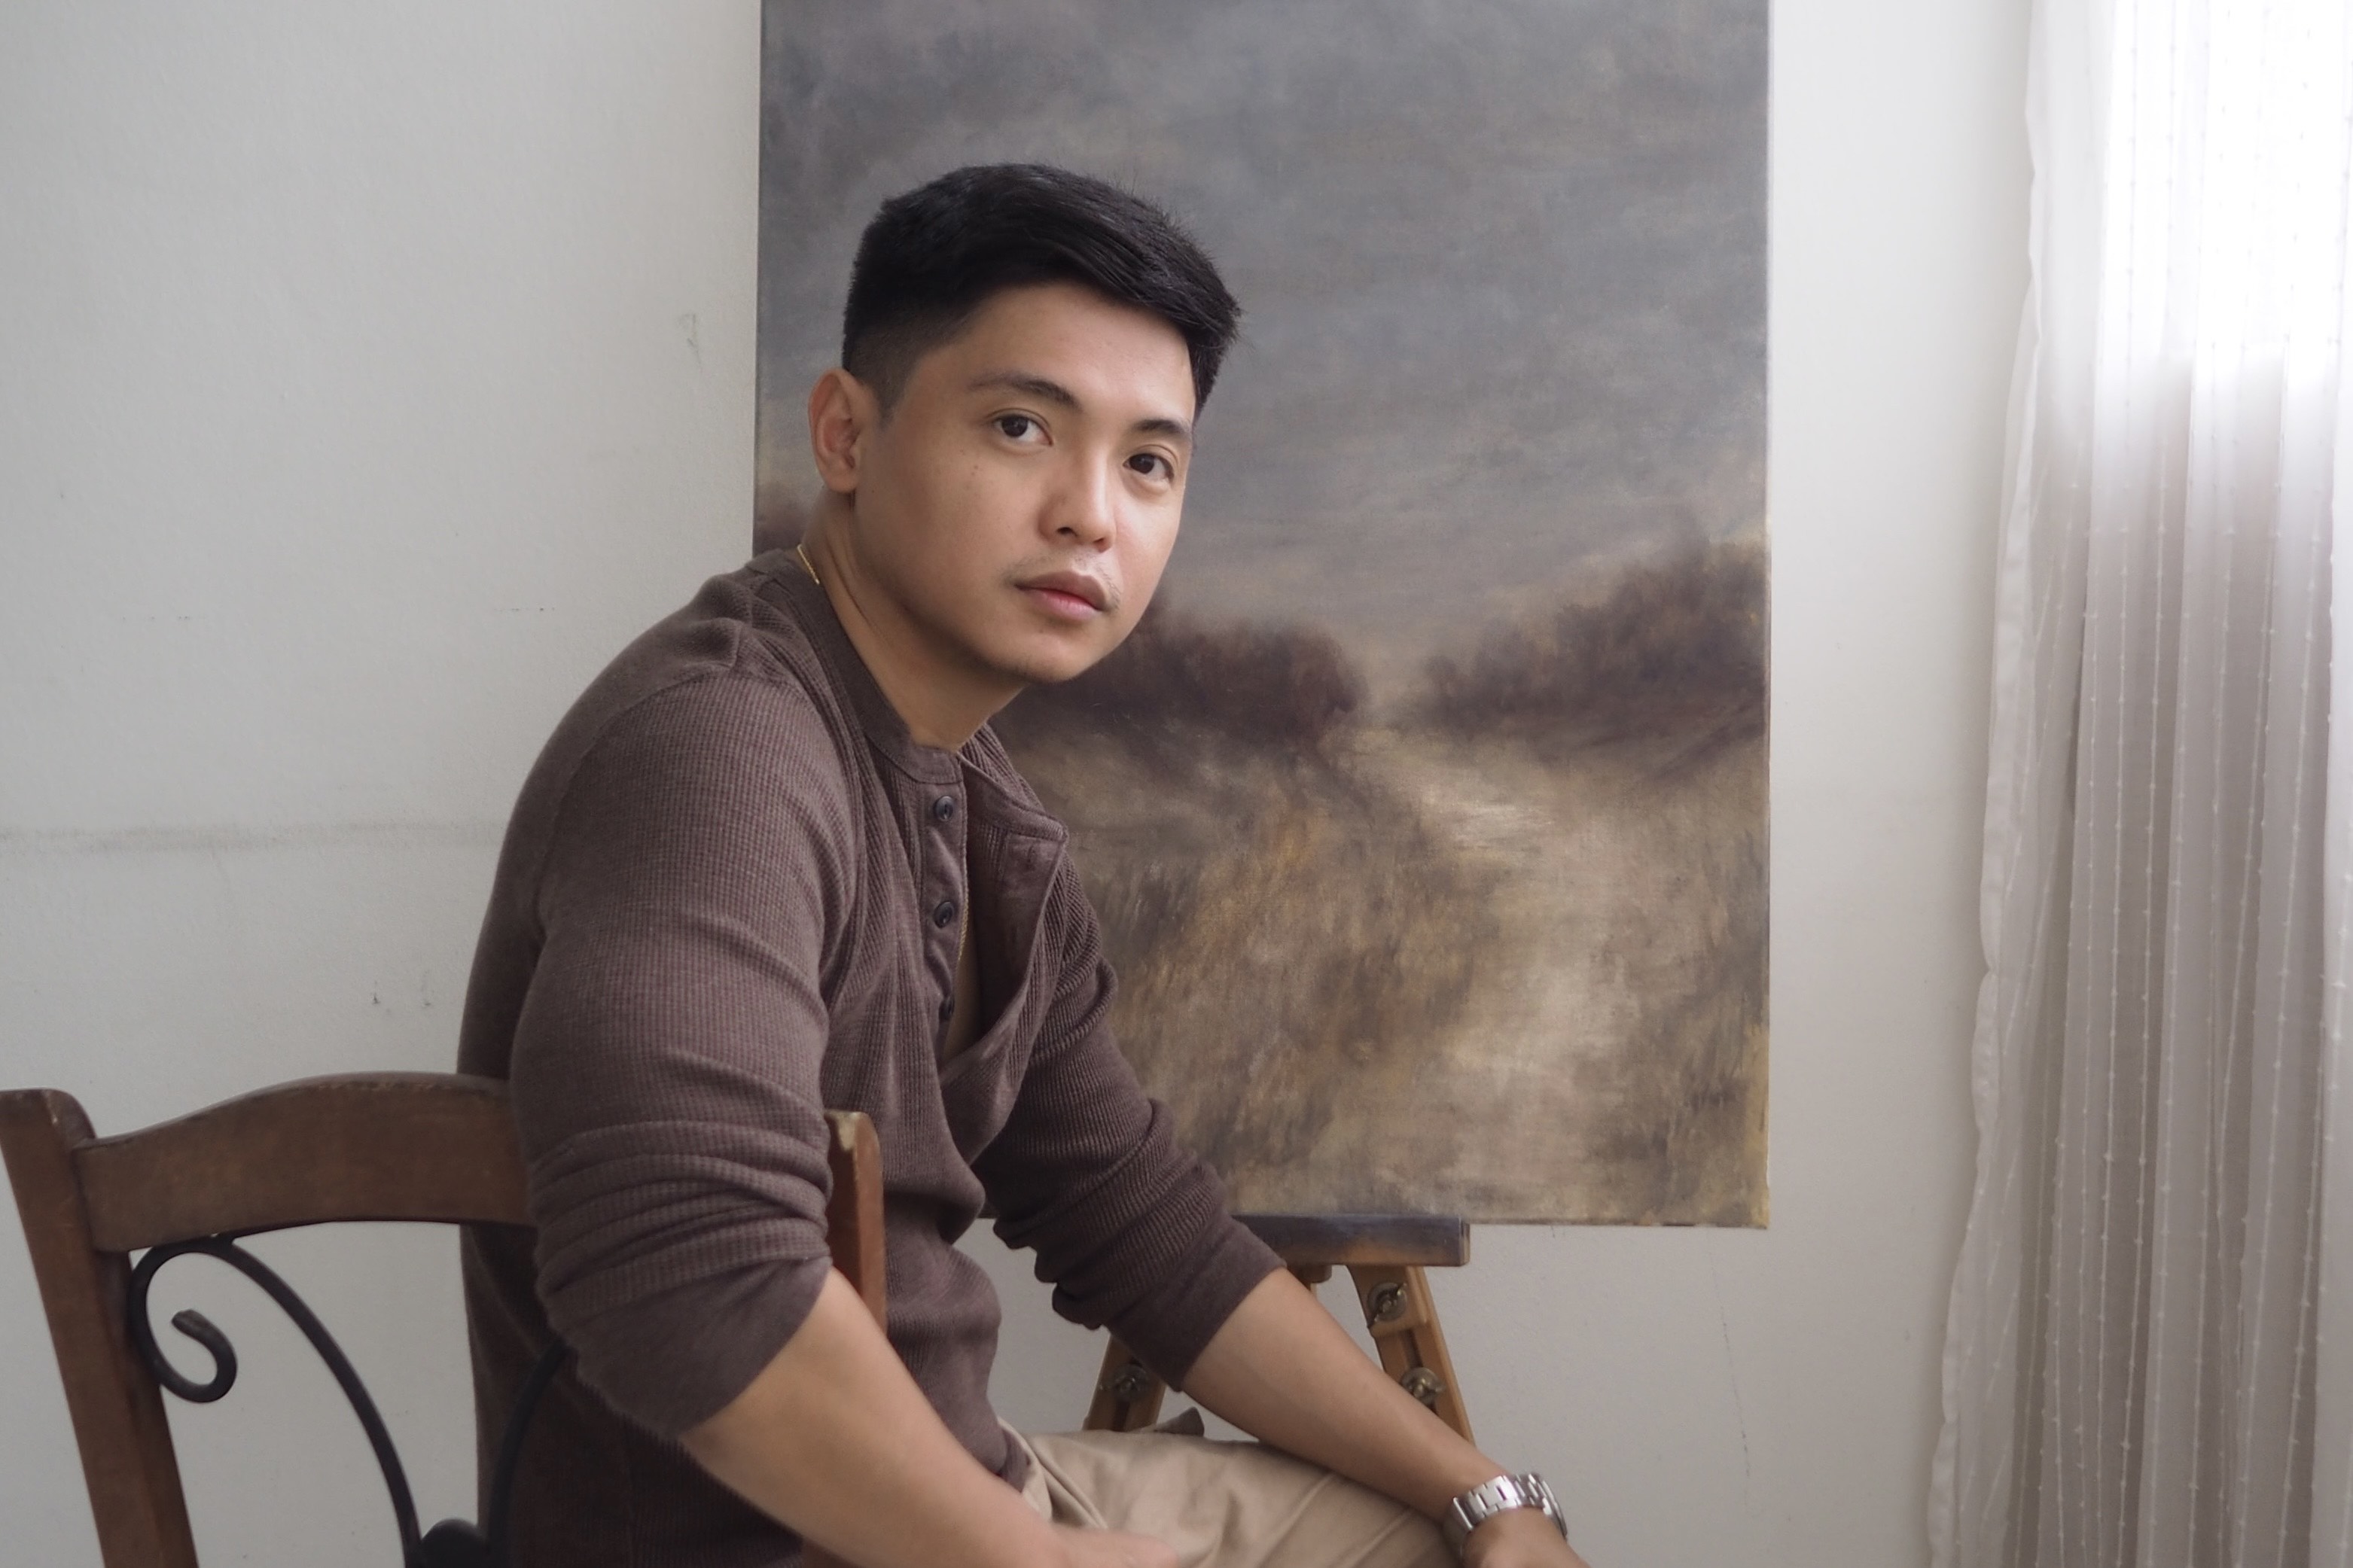 This Singapore-based Filipino architect rediscovered painting in the pandemic. Now he is in Art Fair Philippines